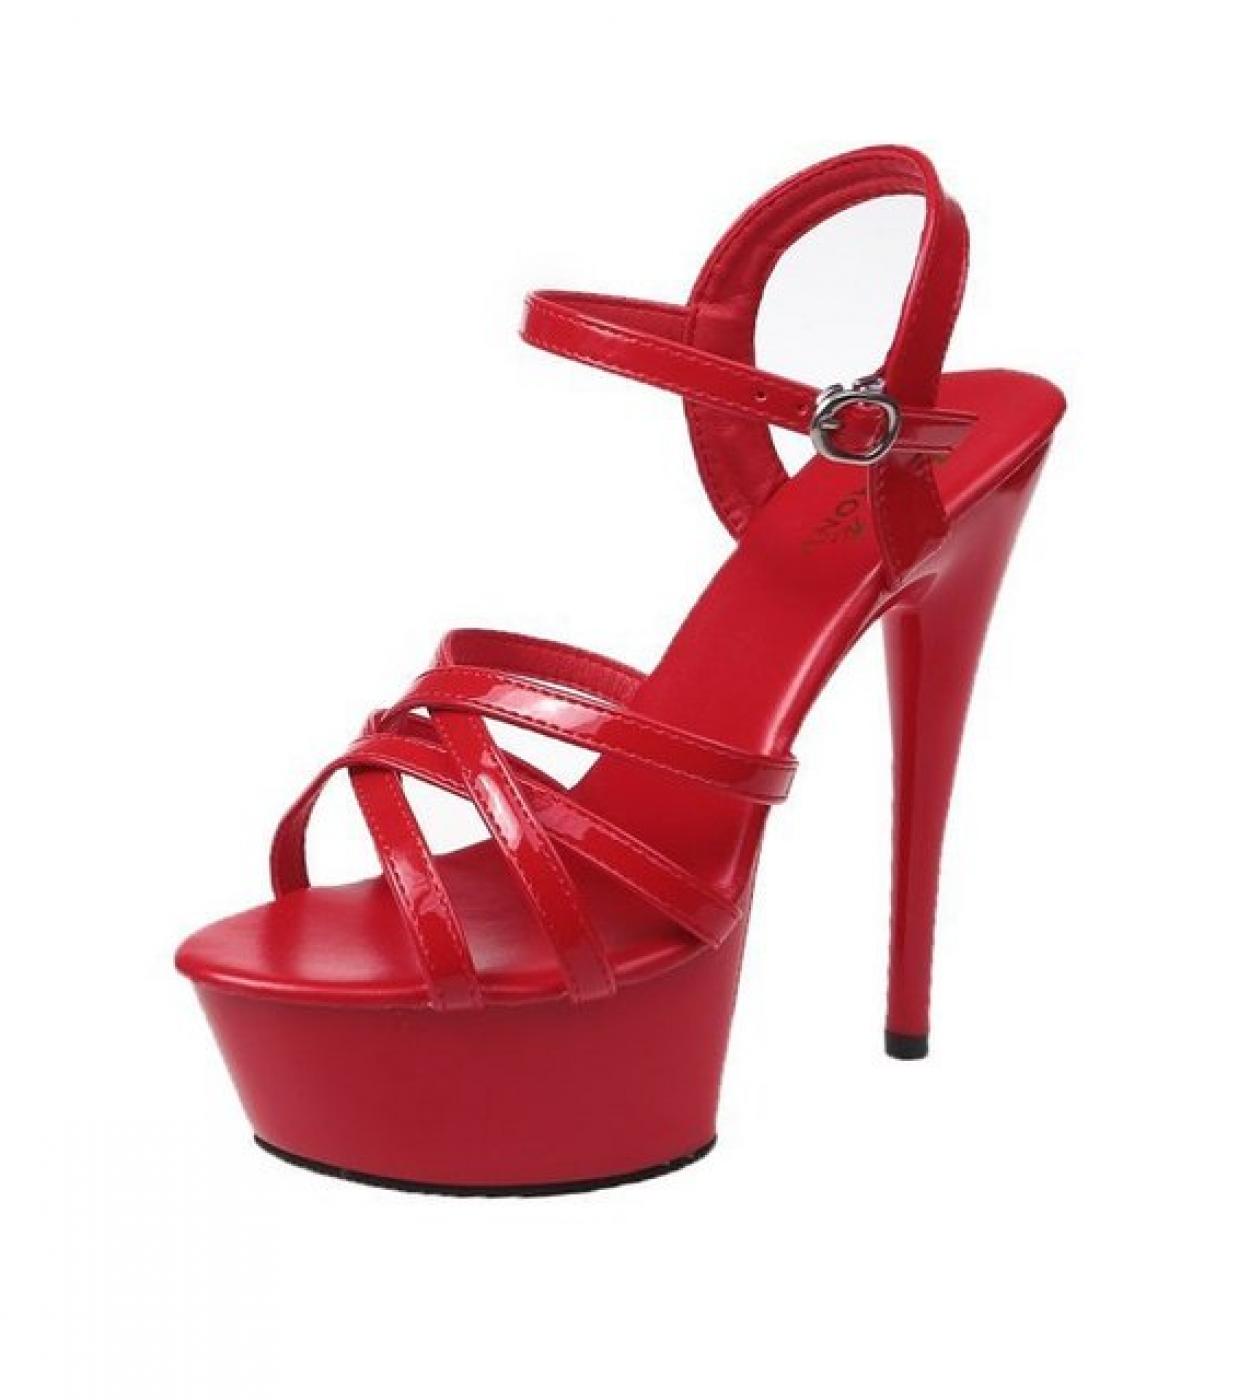 Sandals Women High Heels Female Wedges Shoes for Women Red